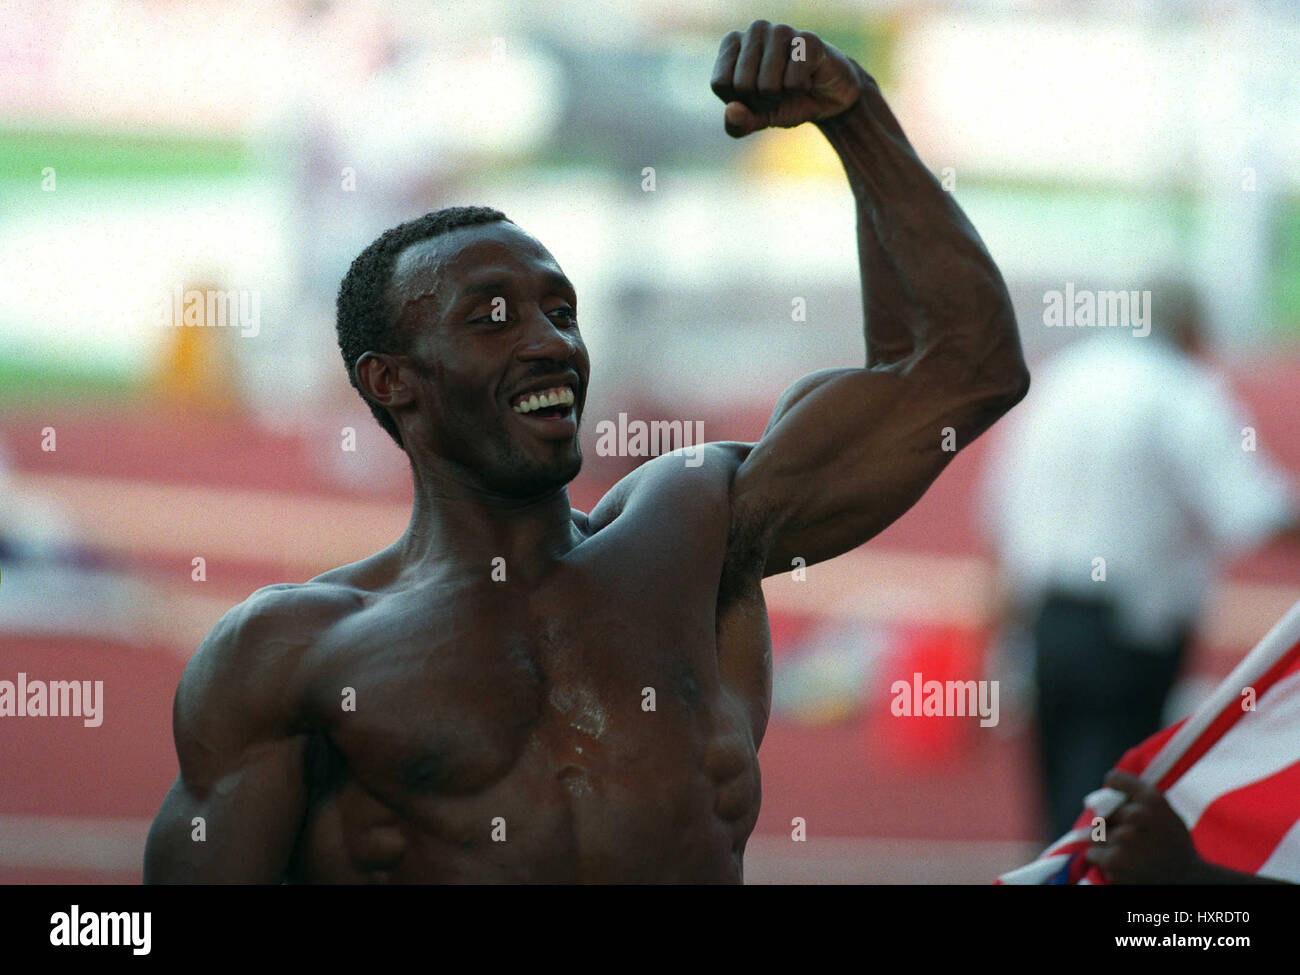 LINFORD CHRISTIE WINS 100 METRE FINAL 15 August 1993 Stock Photo